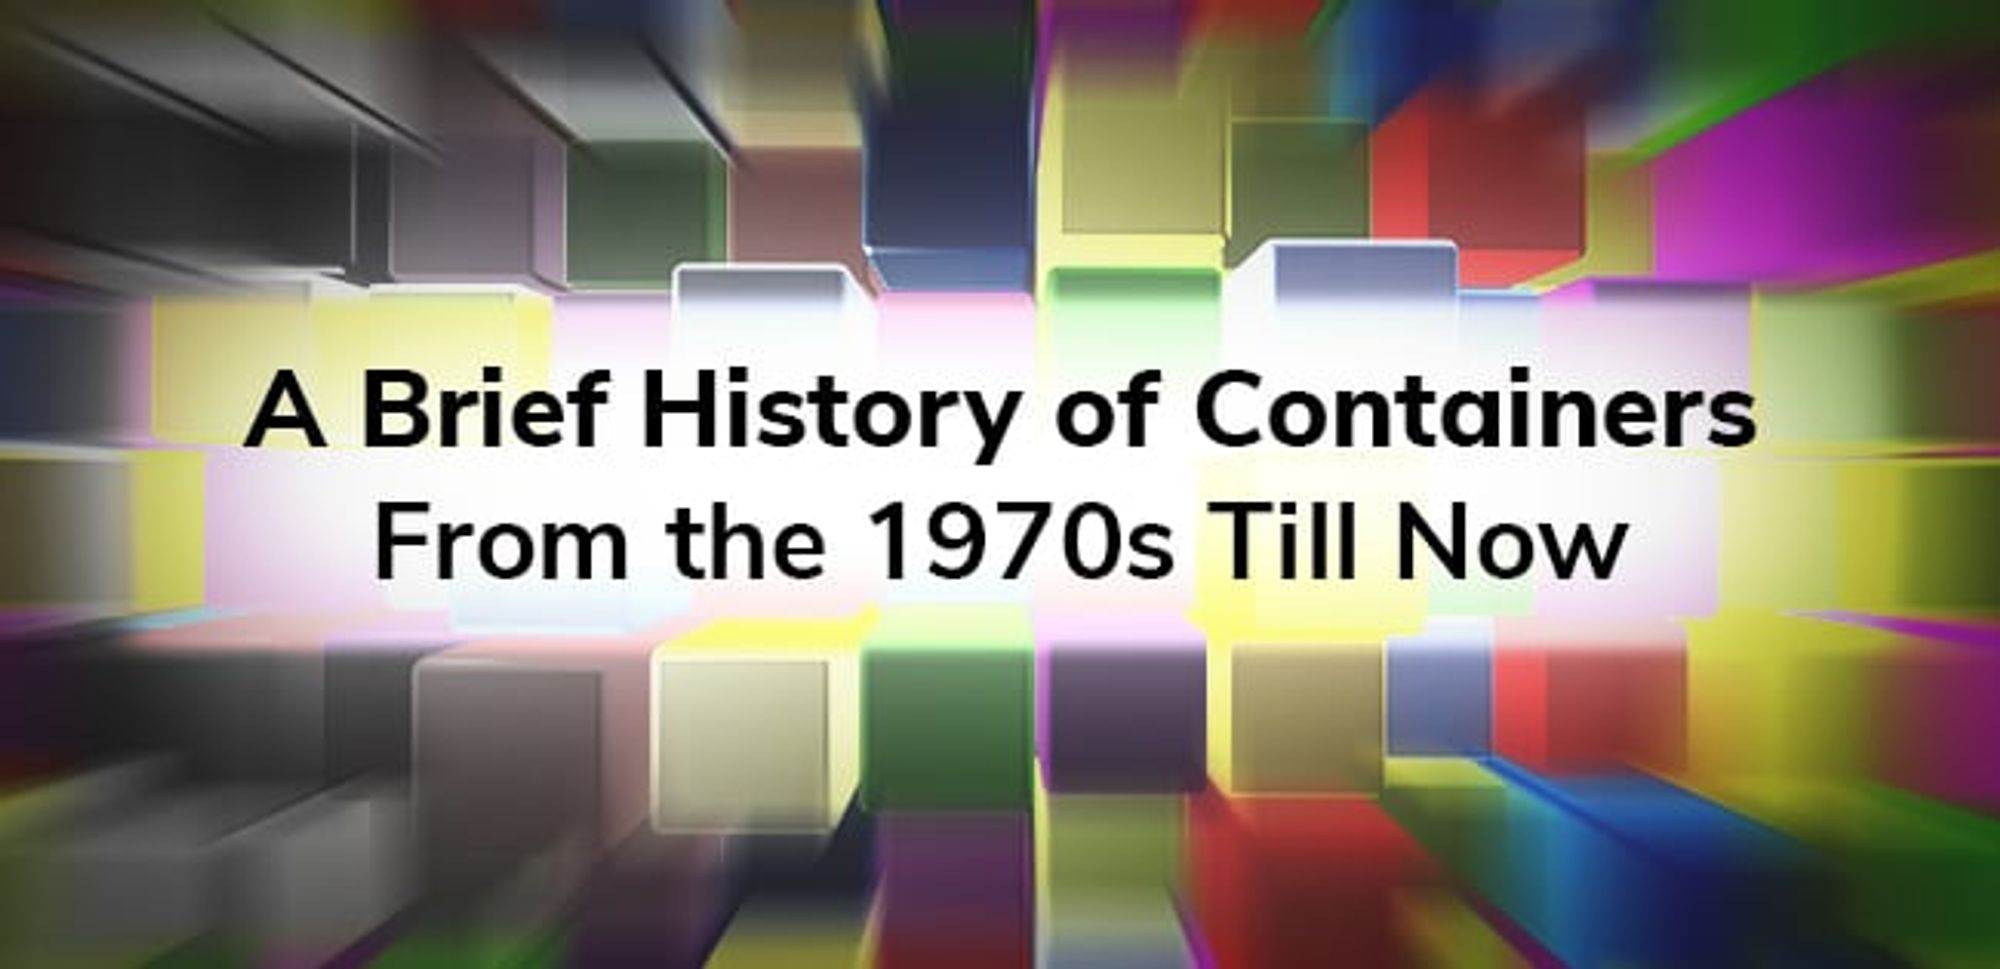 A Brief History of Containers: From the 1970s Till Now